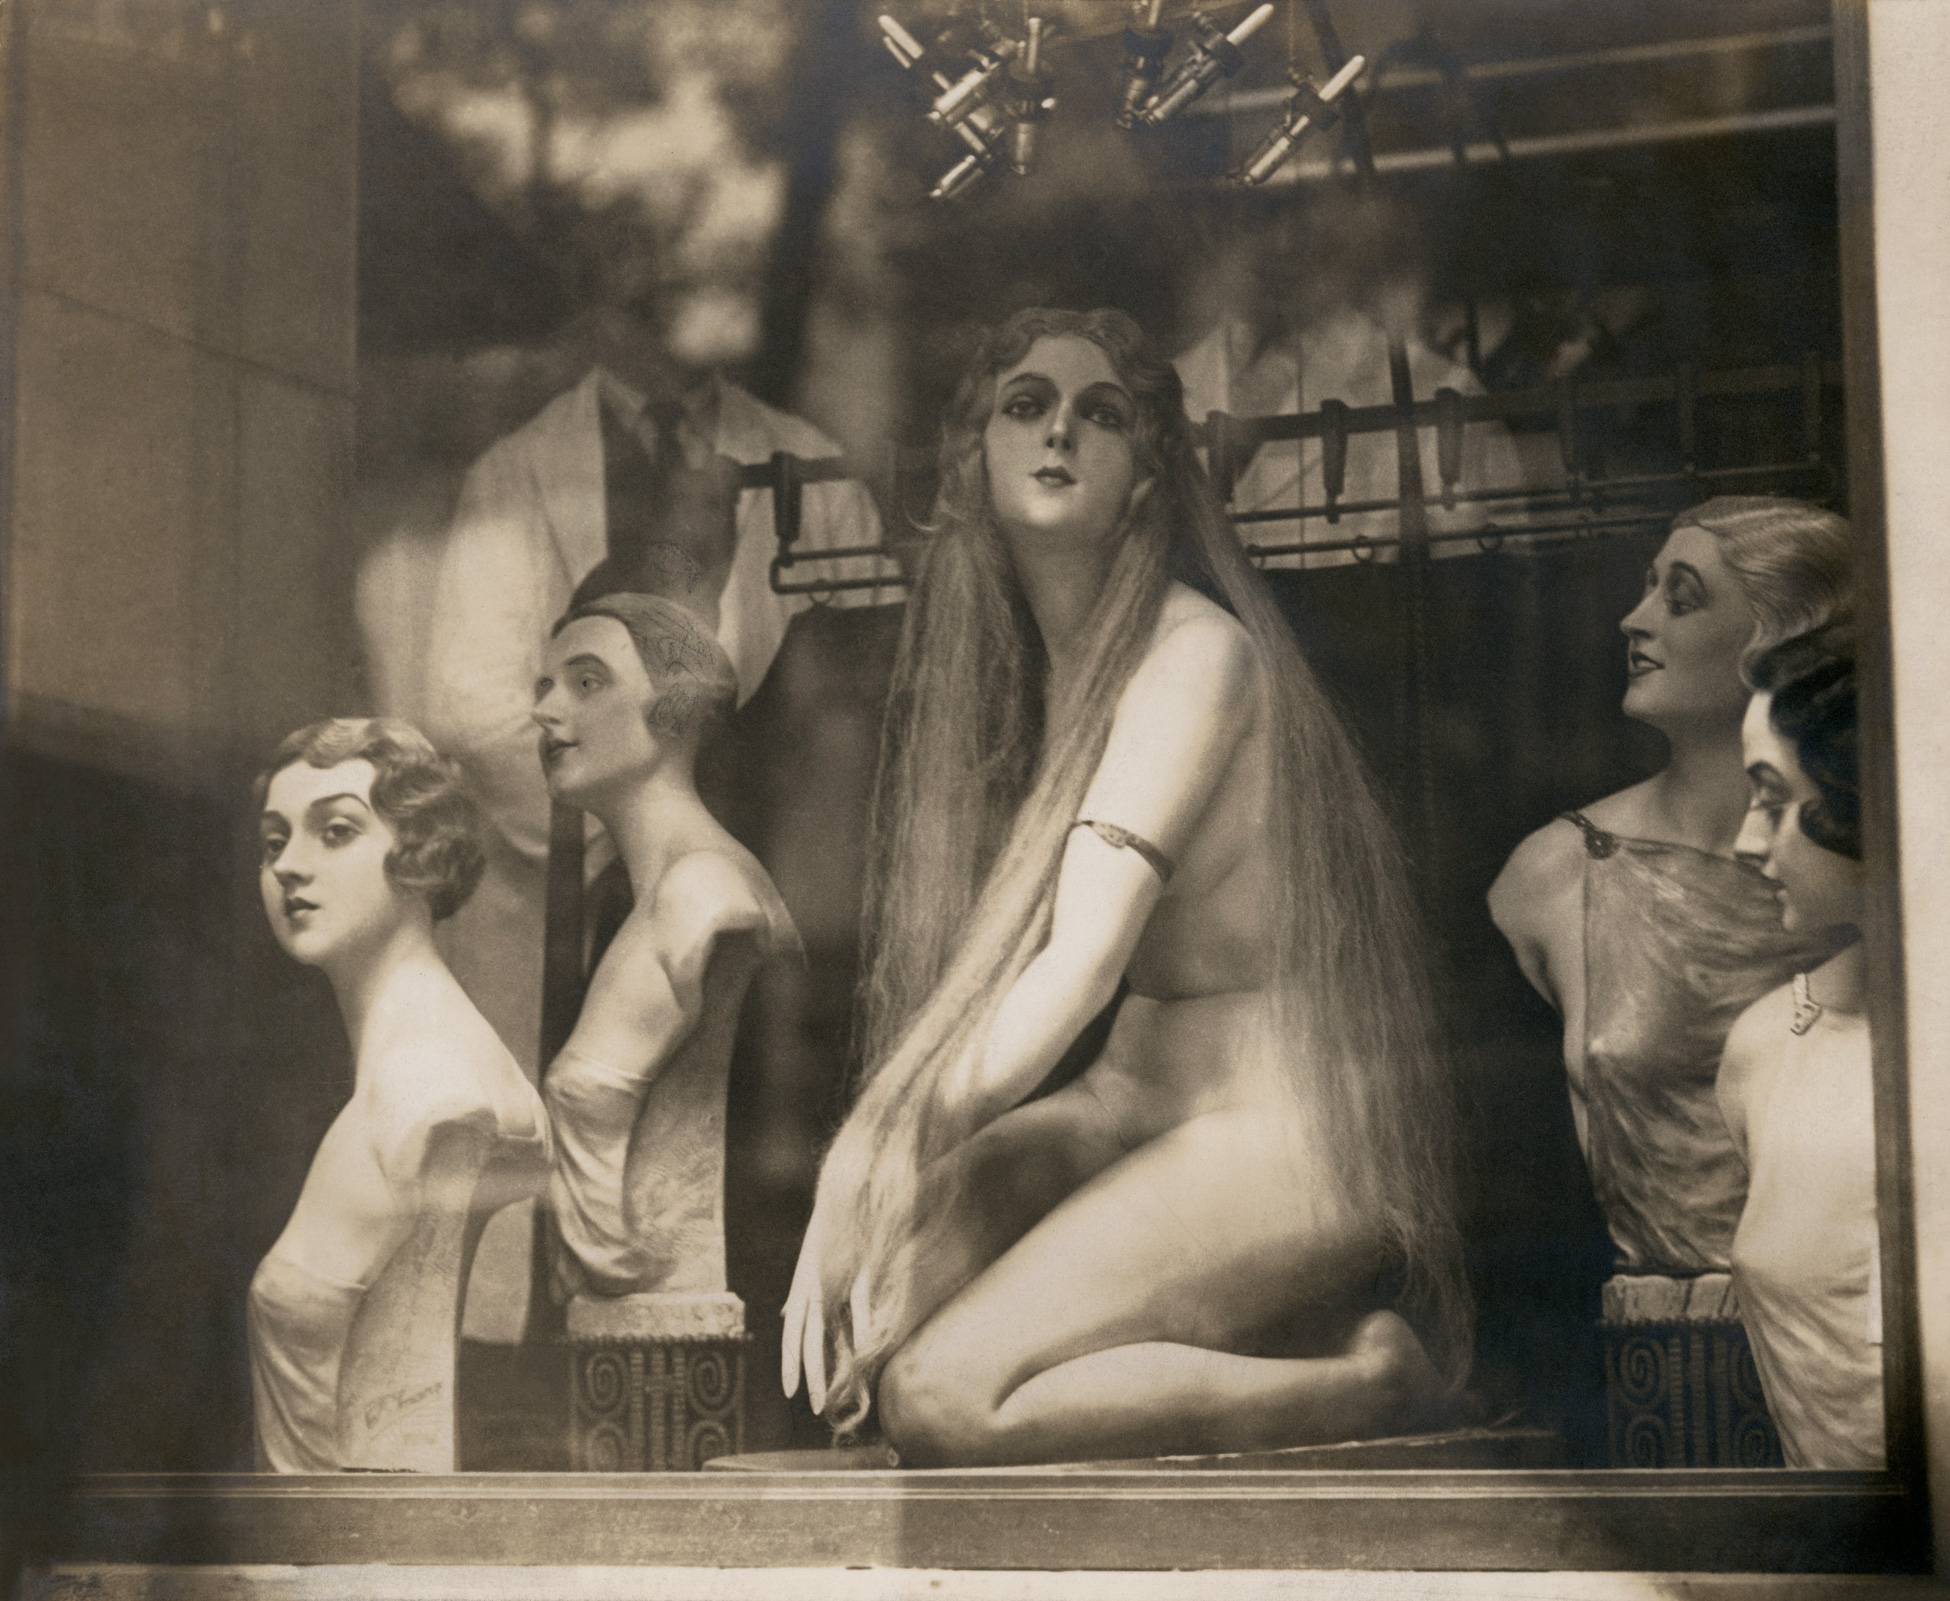 A black and white photo of a storefront with several mannequins in various poses